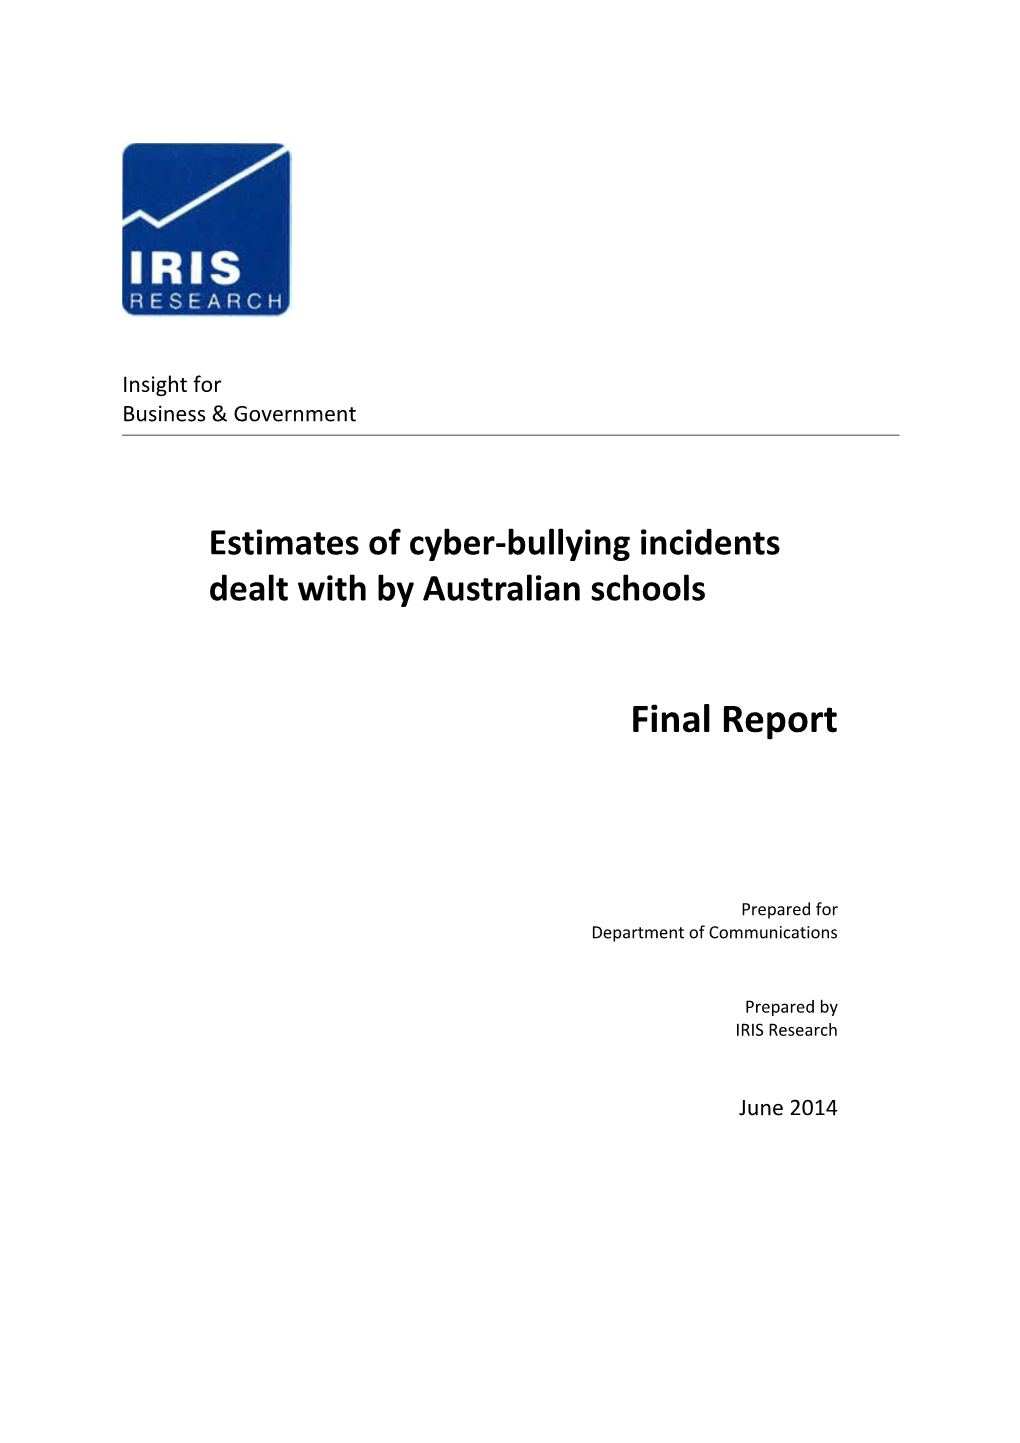 Estimates of Cyber-Bullying Incidents Dealt with by Australian Schools